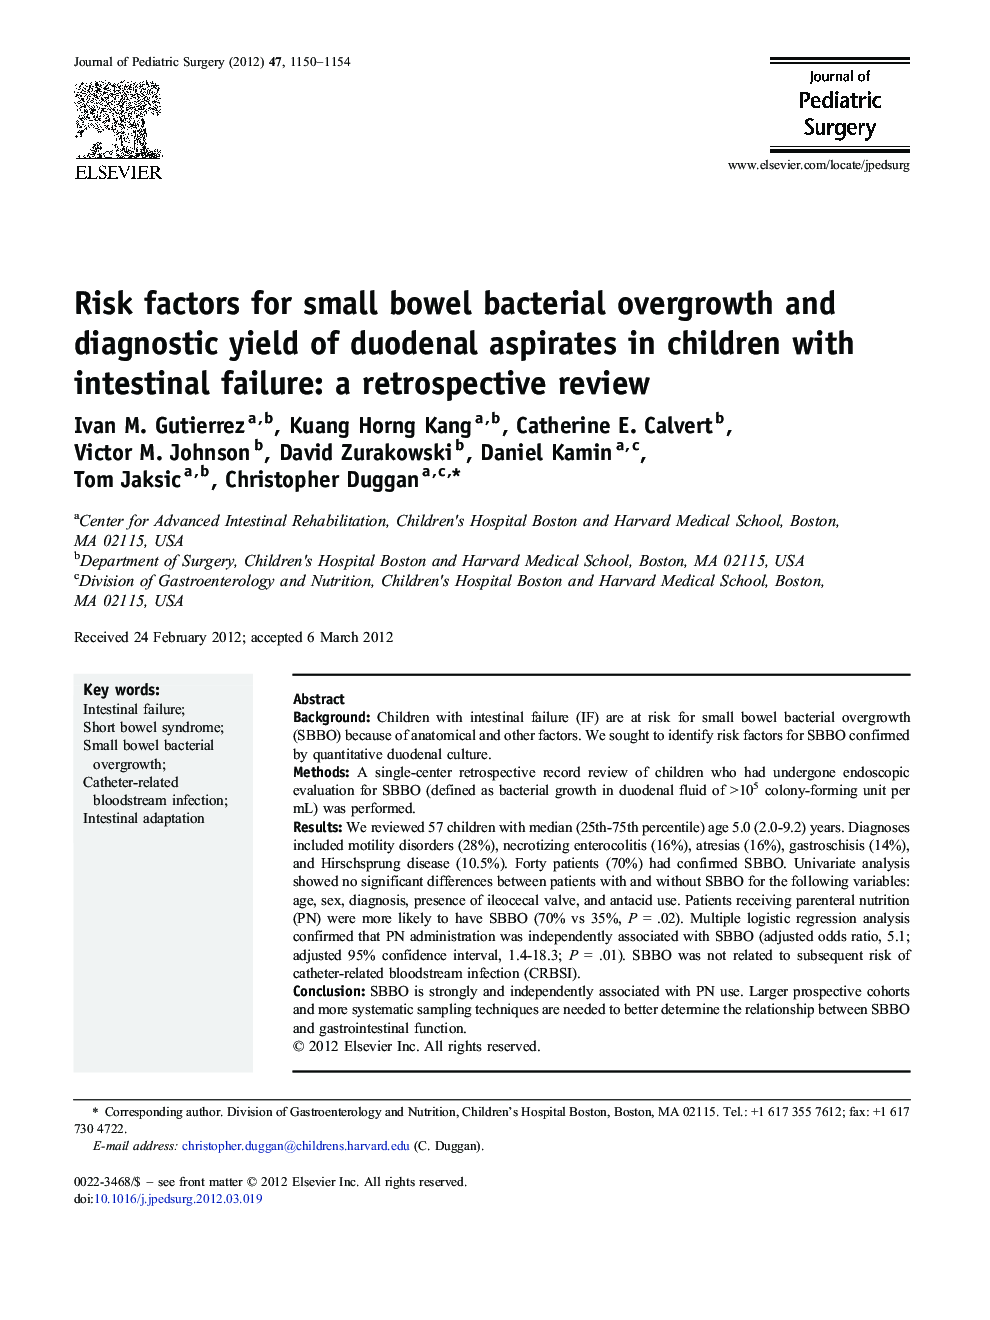 Risk factors for small bowel bacterial overgrowth and diagnostic yield of duodenal aspirates in children with intestinal failure: a retrospective review